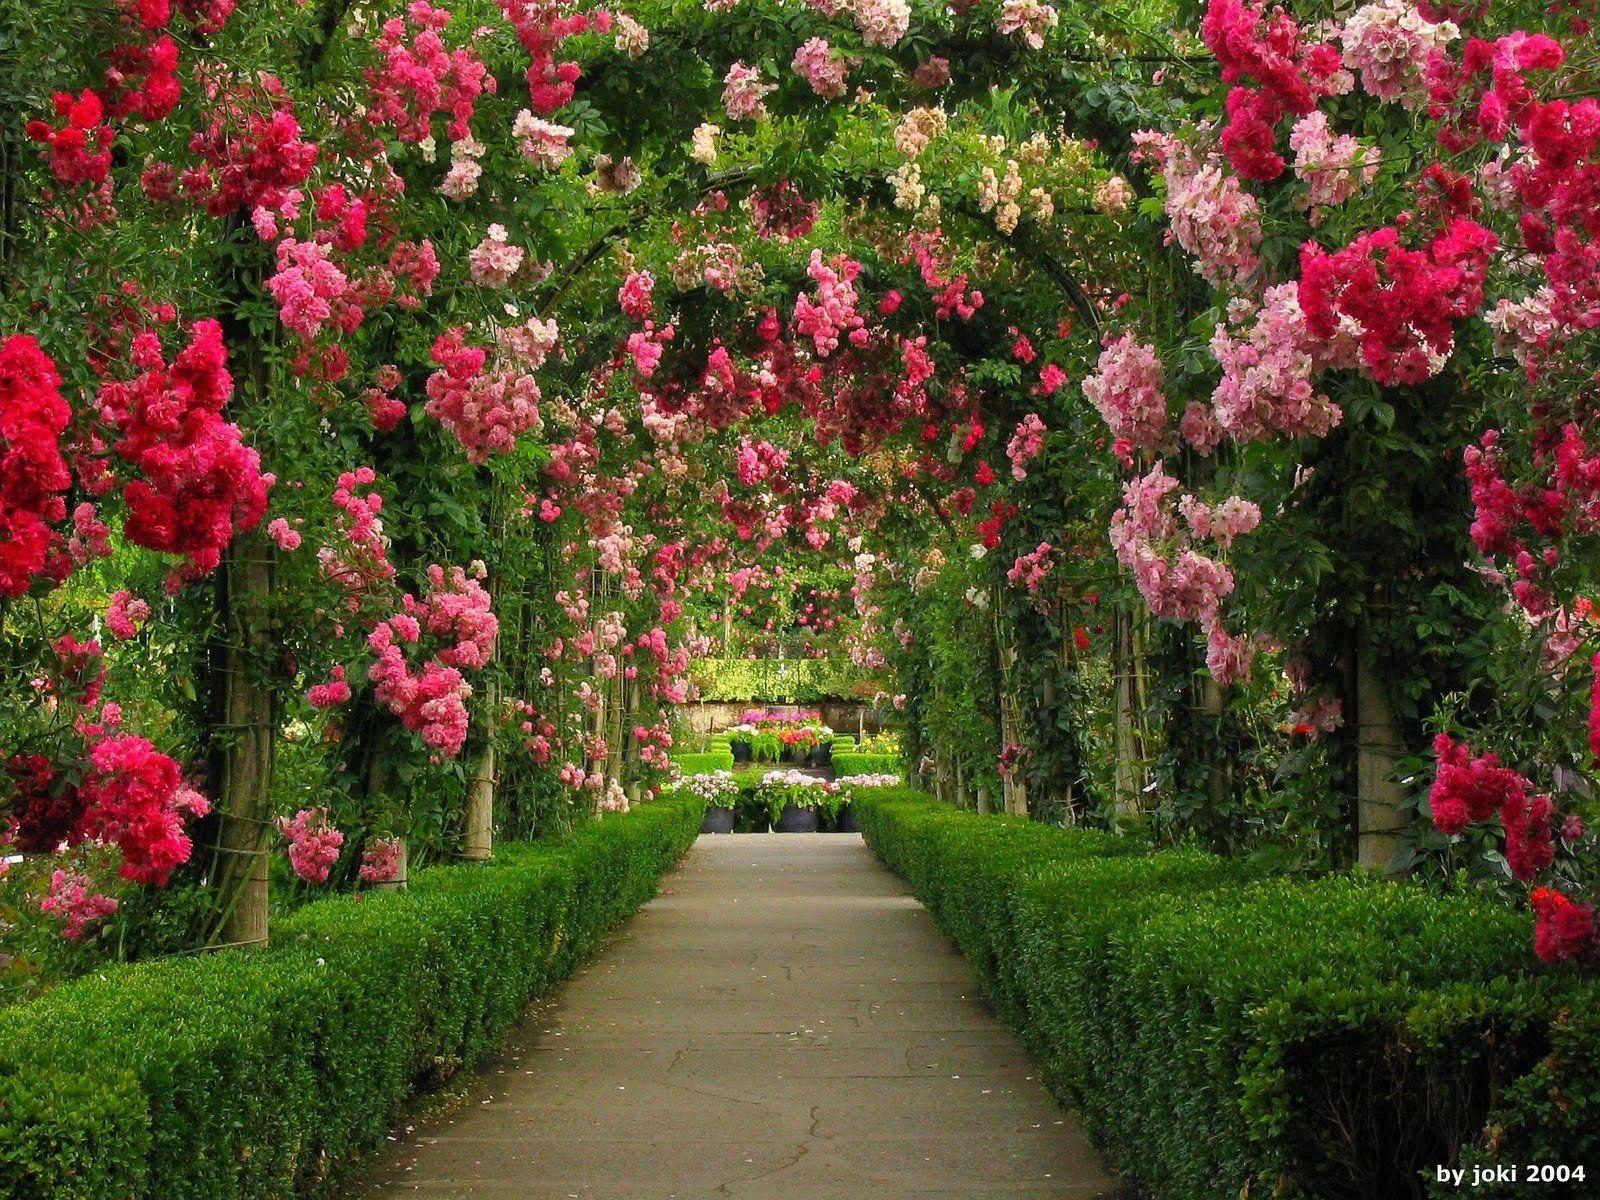 garden background images for photoshop